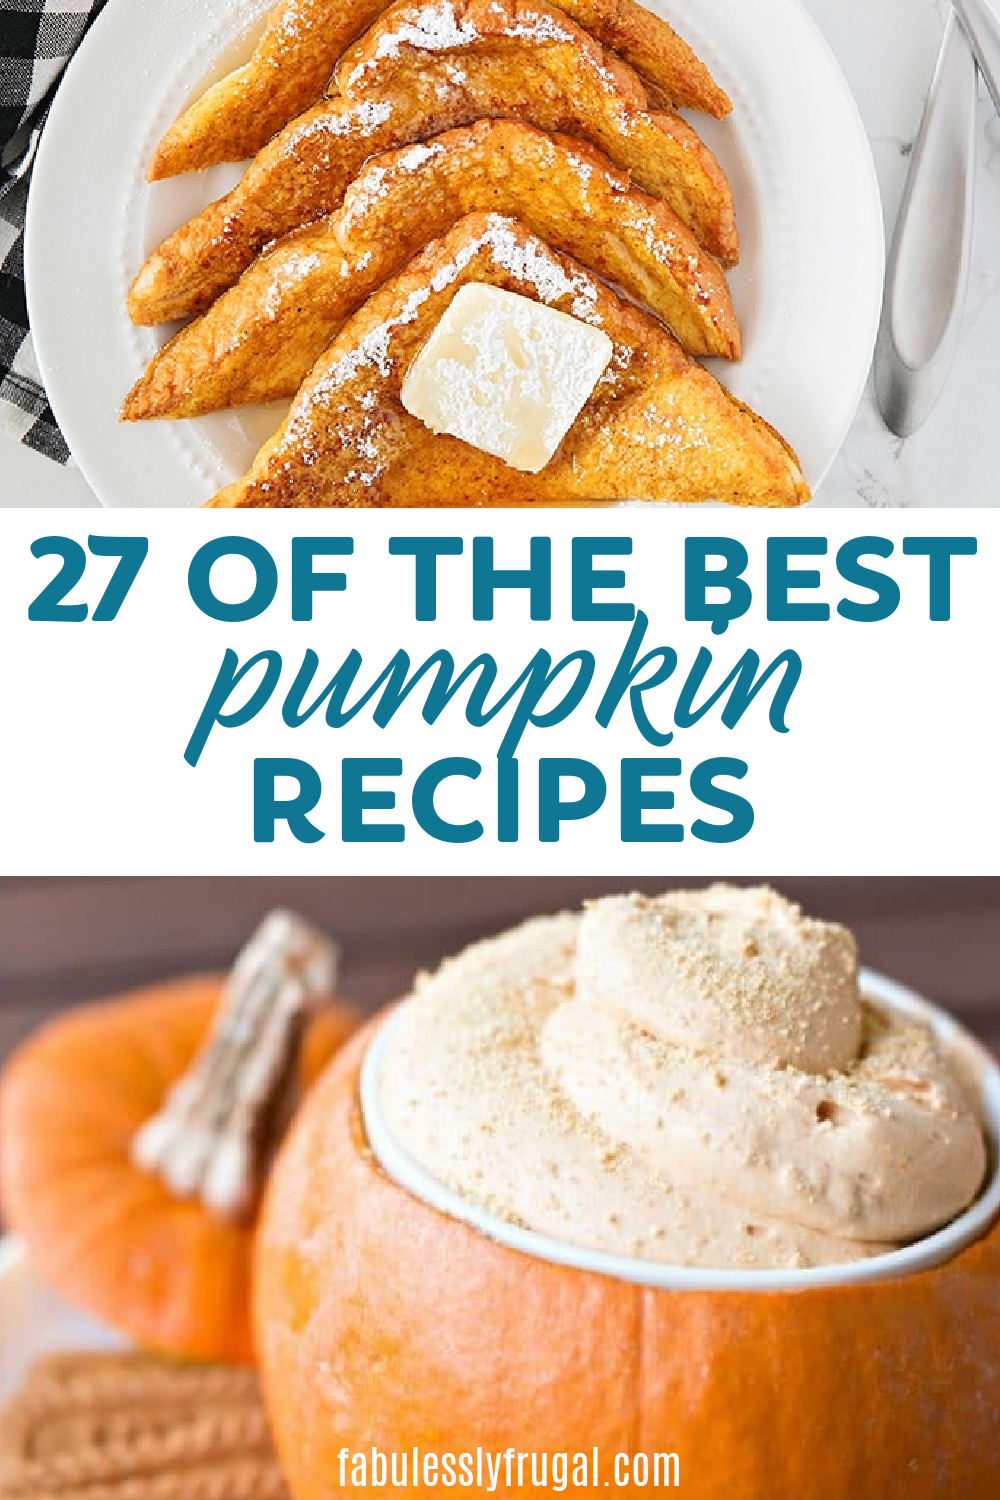 27 of the Greatest Pumpkin Recipes You Need to Make - Fabulessly Frugal